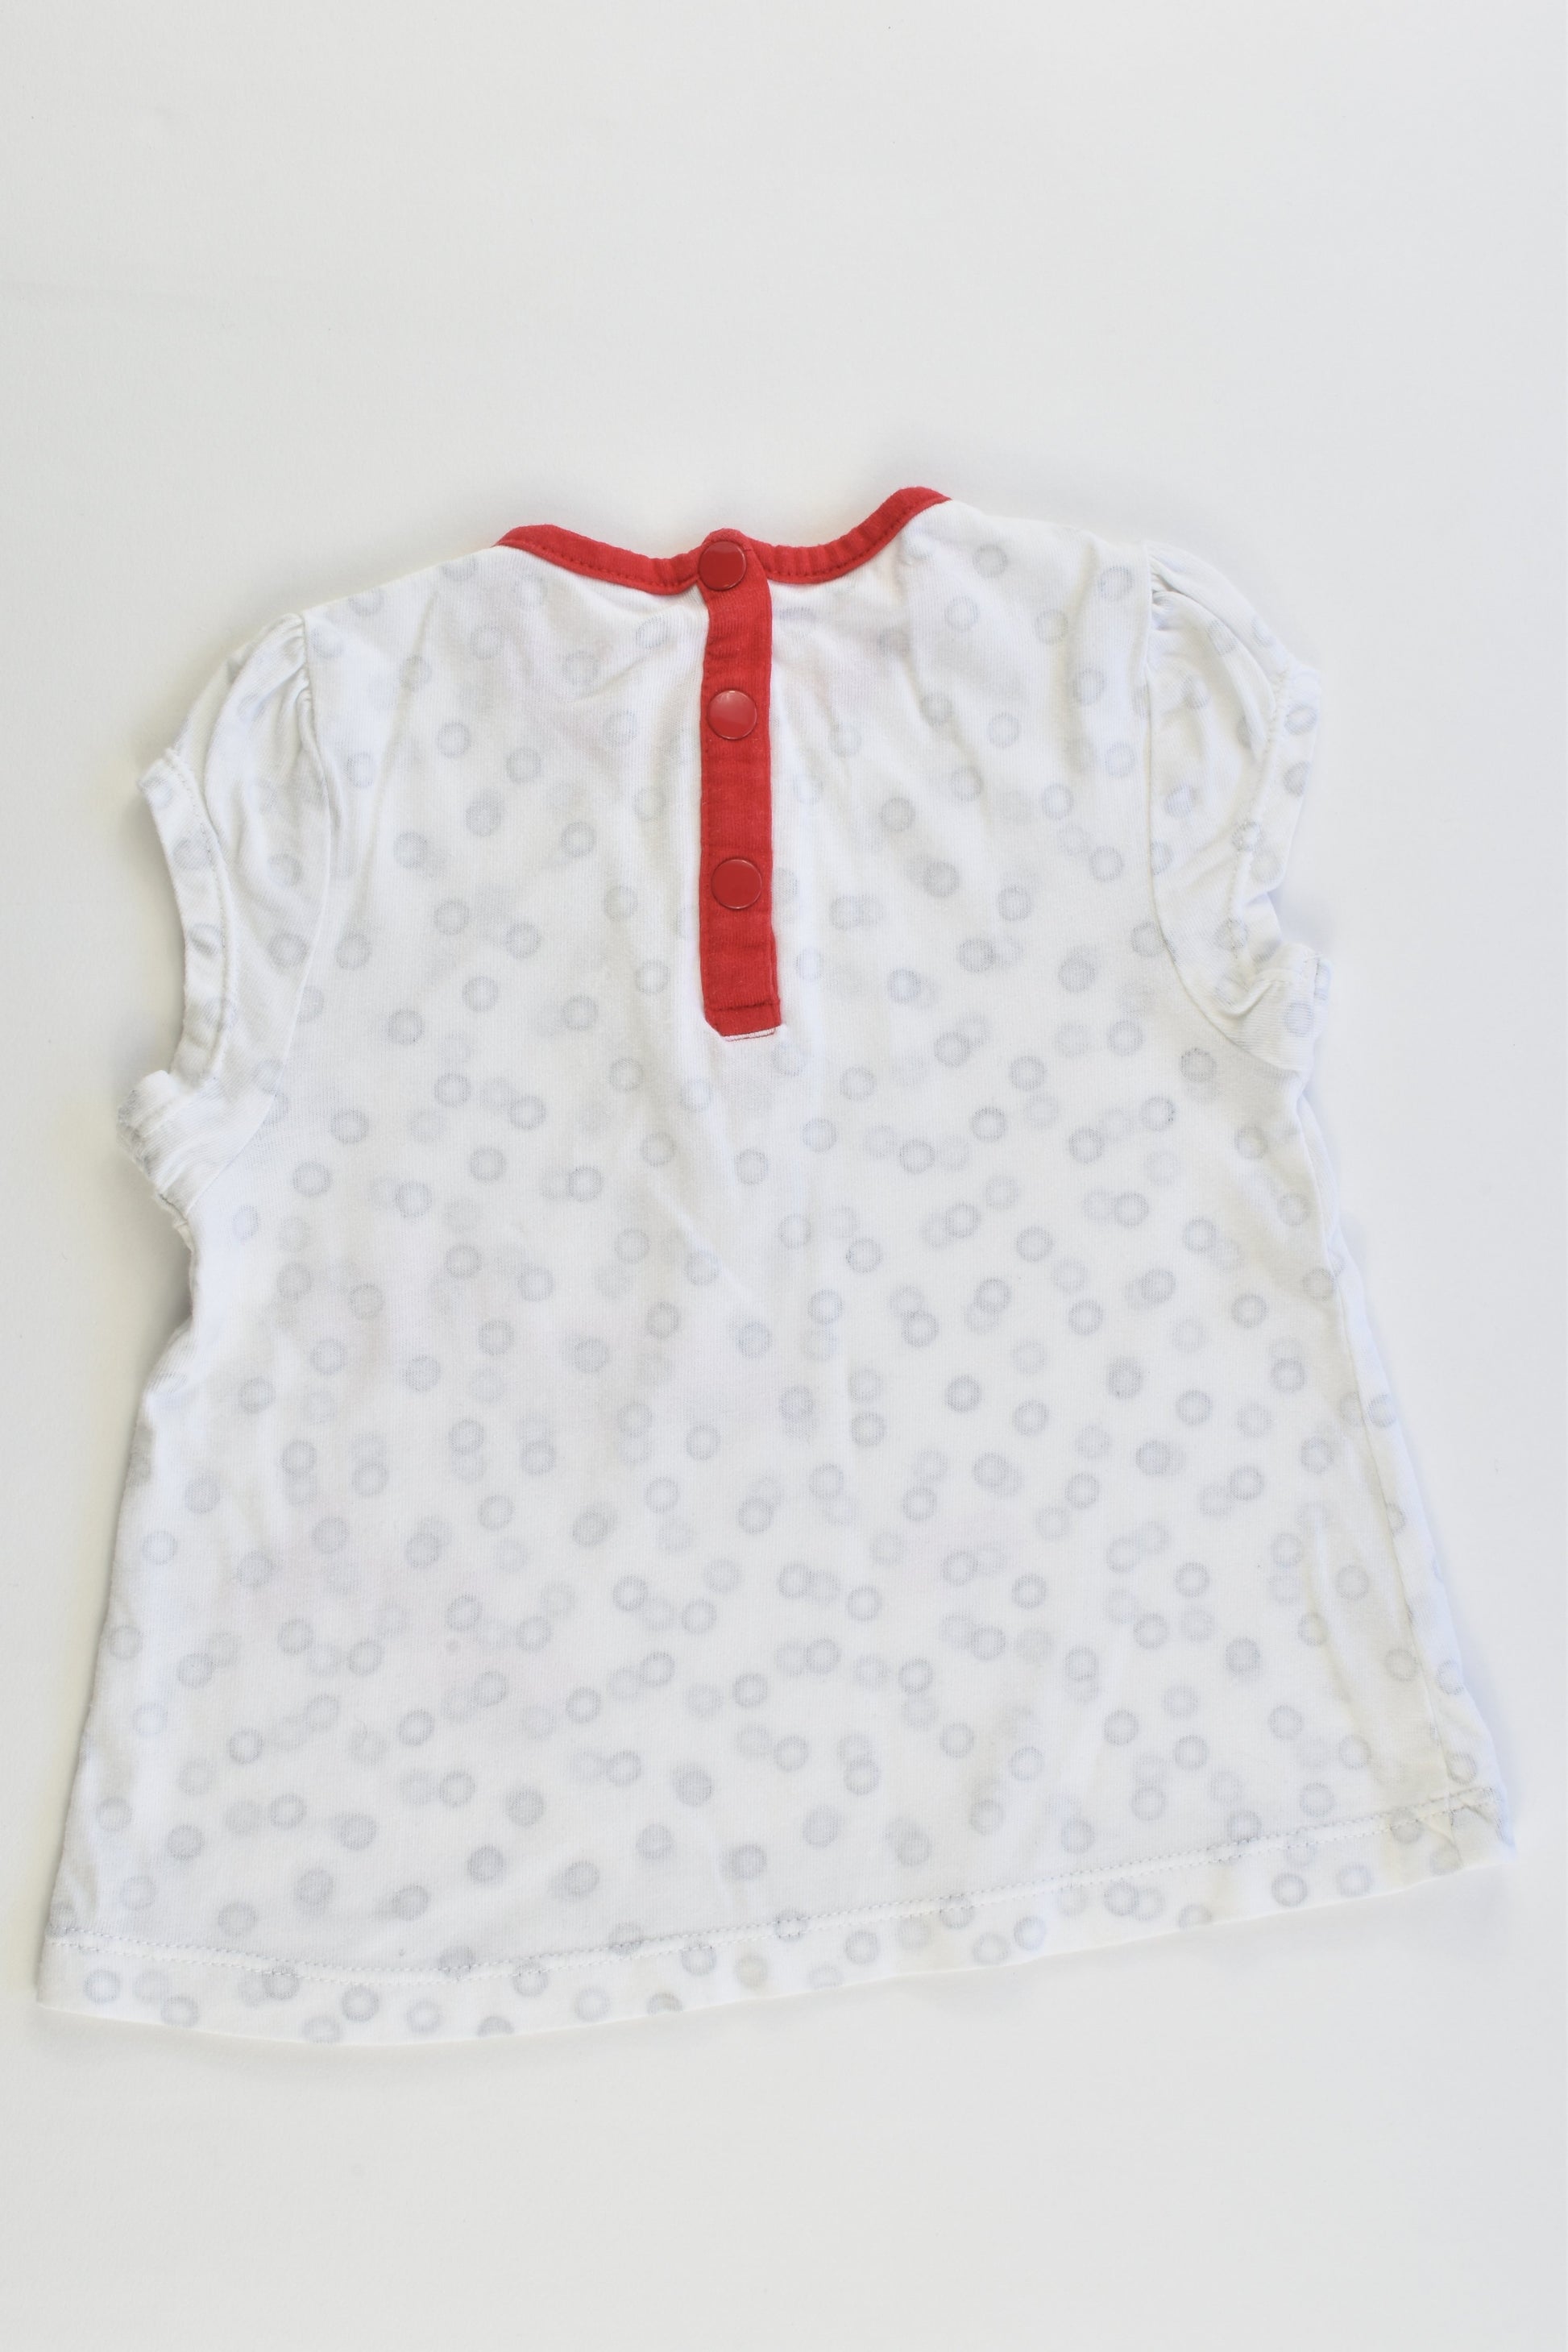 Pomme Framboise by Orchestra (France) Size 00 (6 months, 67 cm) '1, 2, 3 coquelicots' Tunic